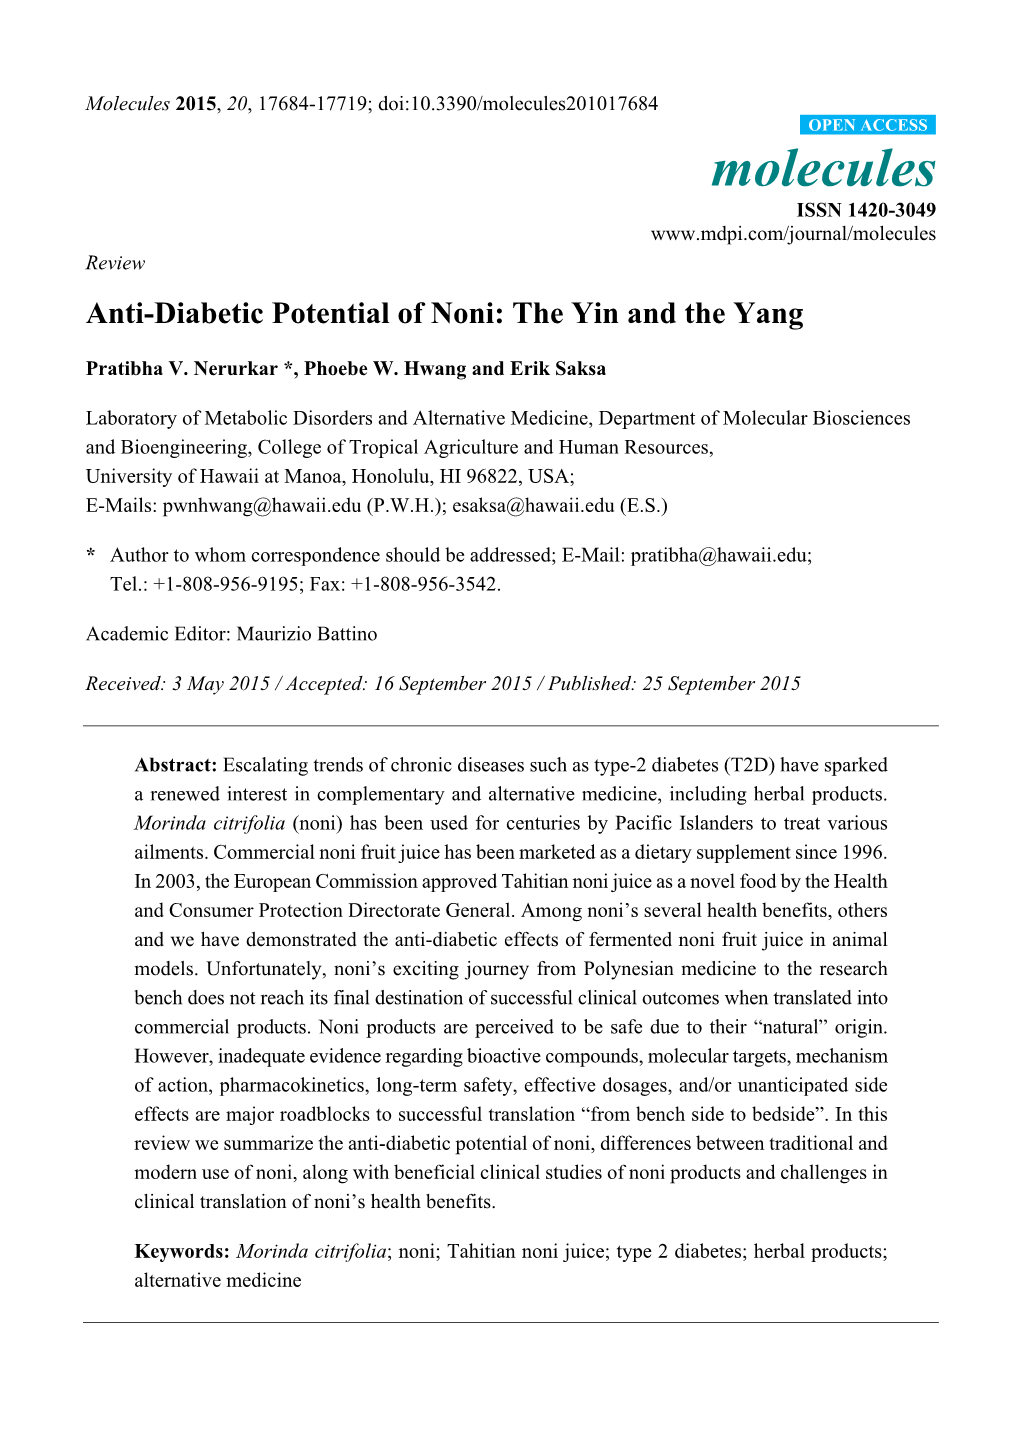 Anti-Diabetic Potential of Noni: the Yin and the Yang